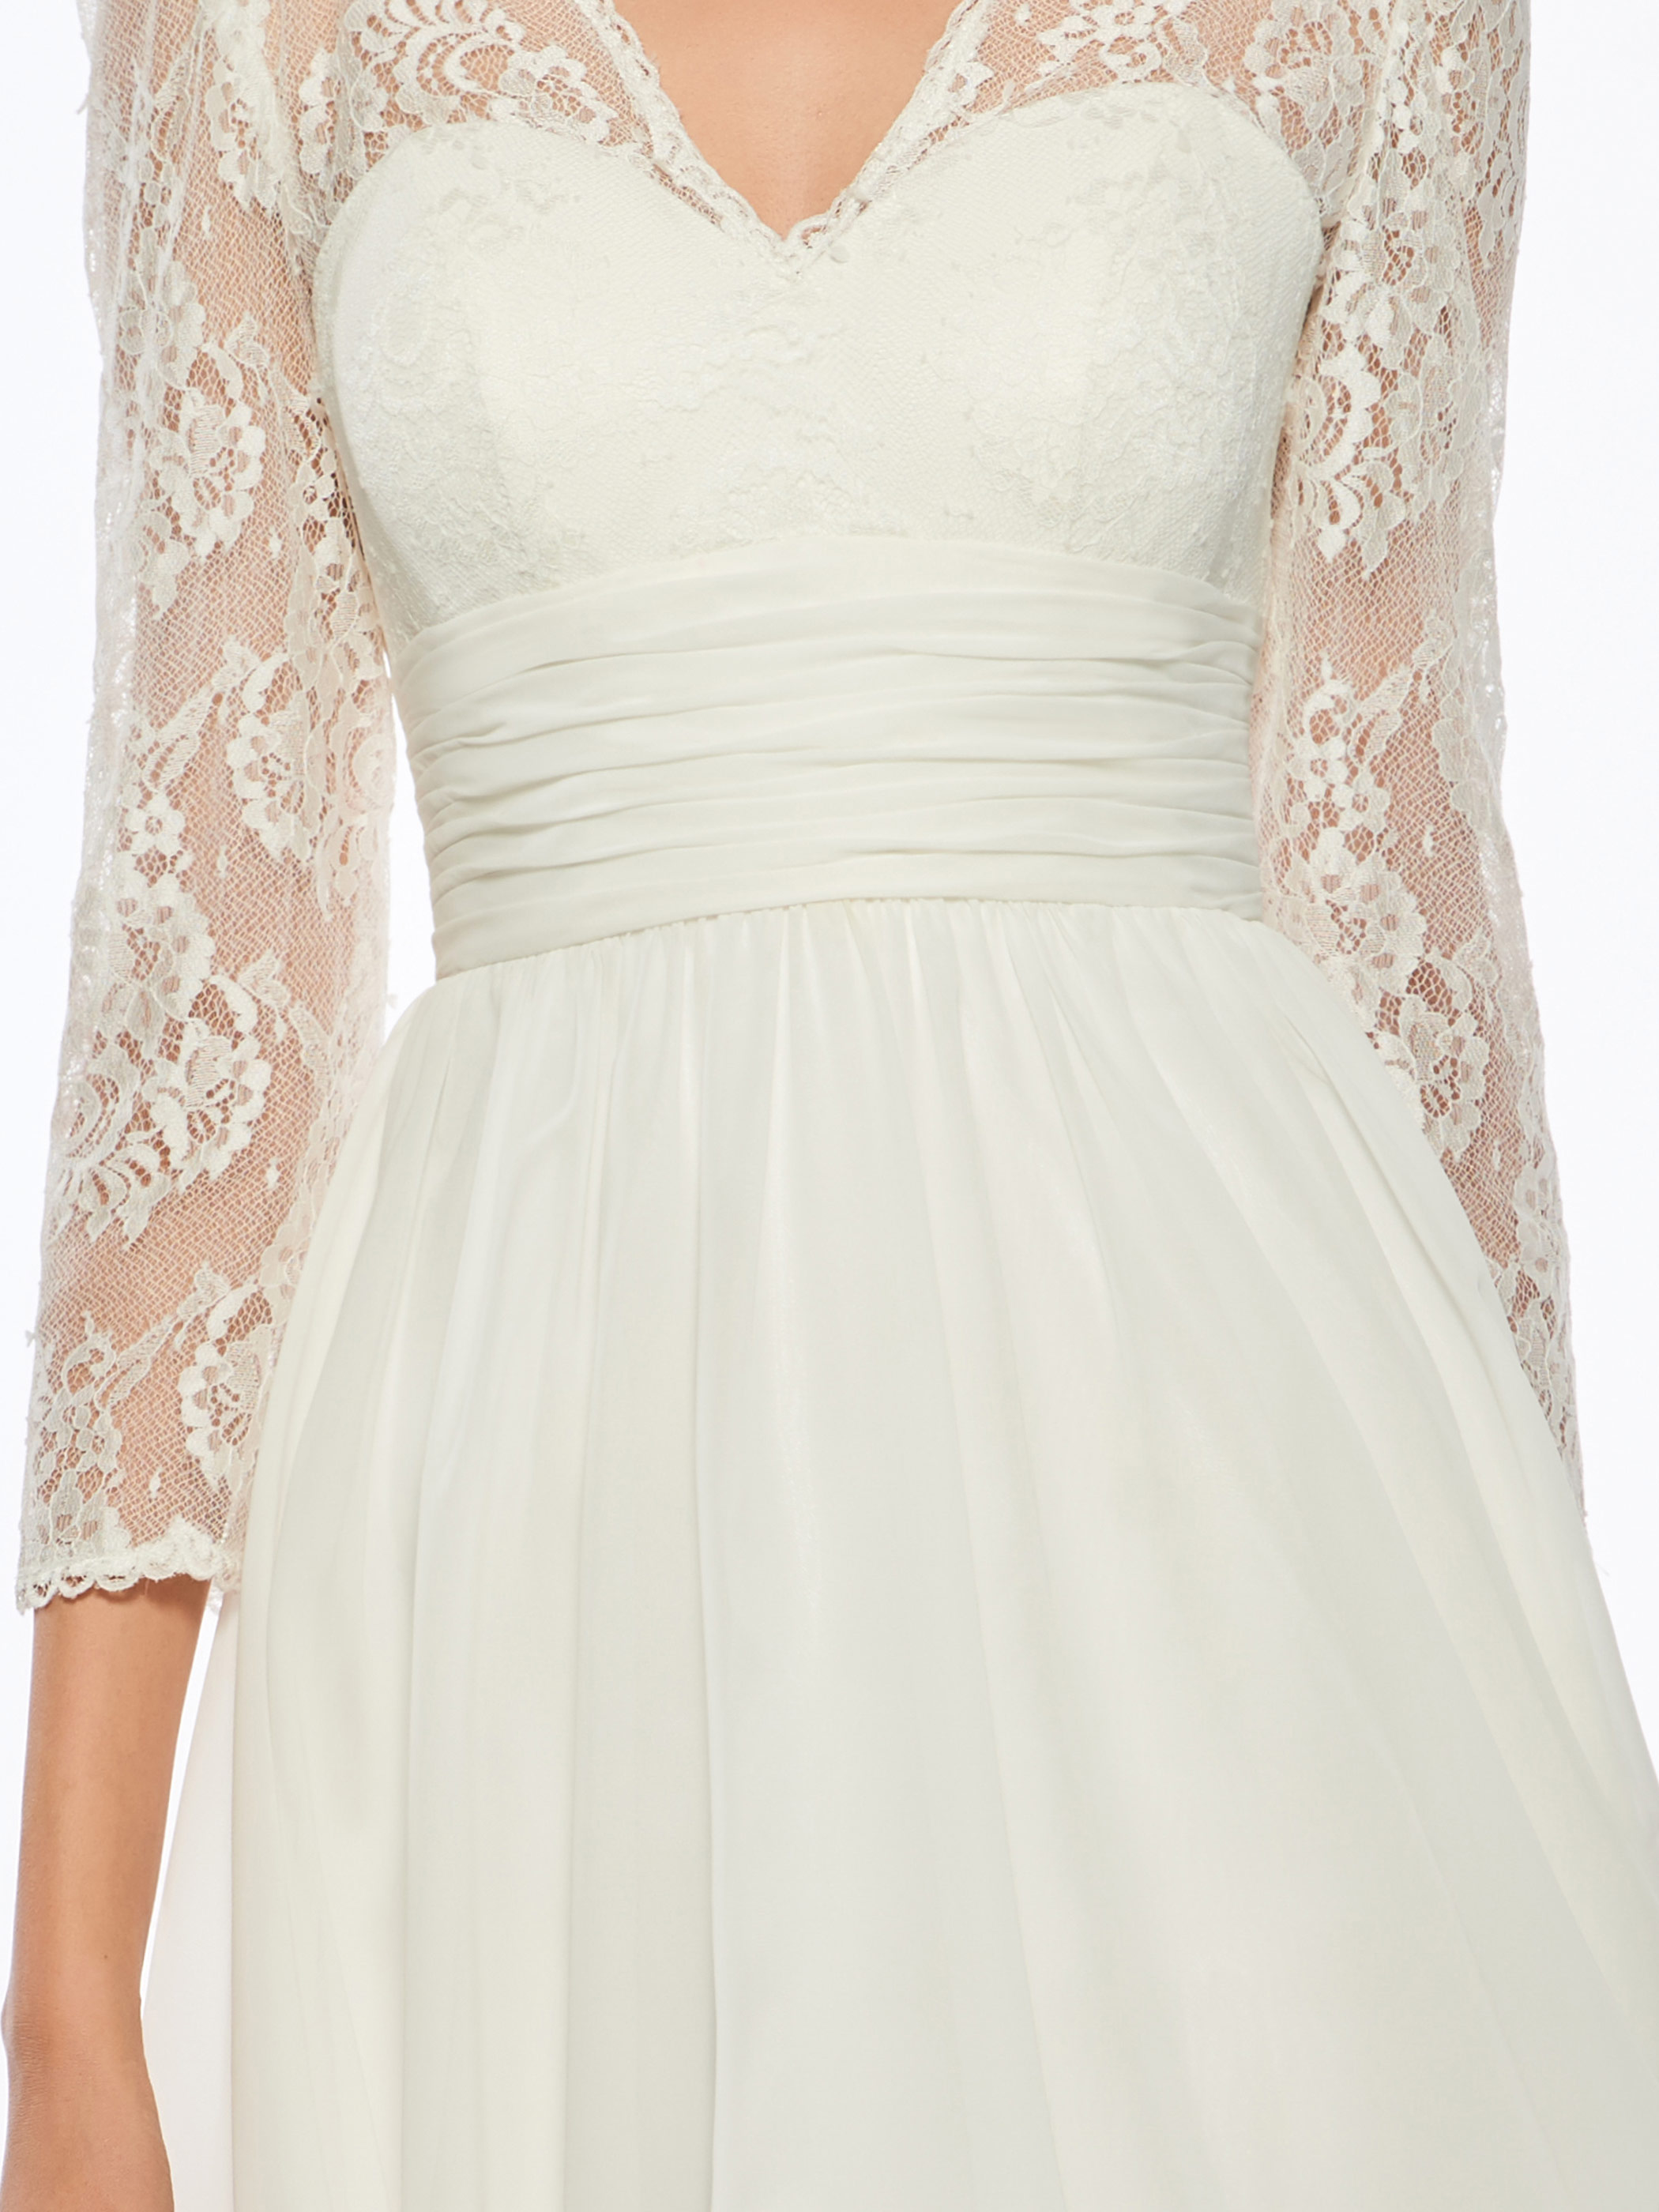 3/4 Length Sleeves Lace Short Mother Of The Bride Dress